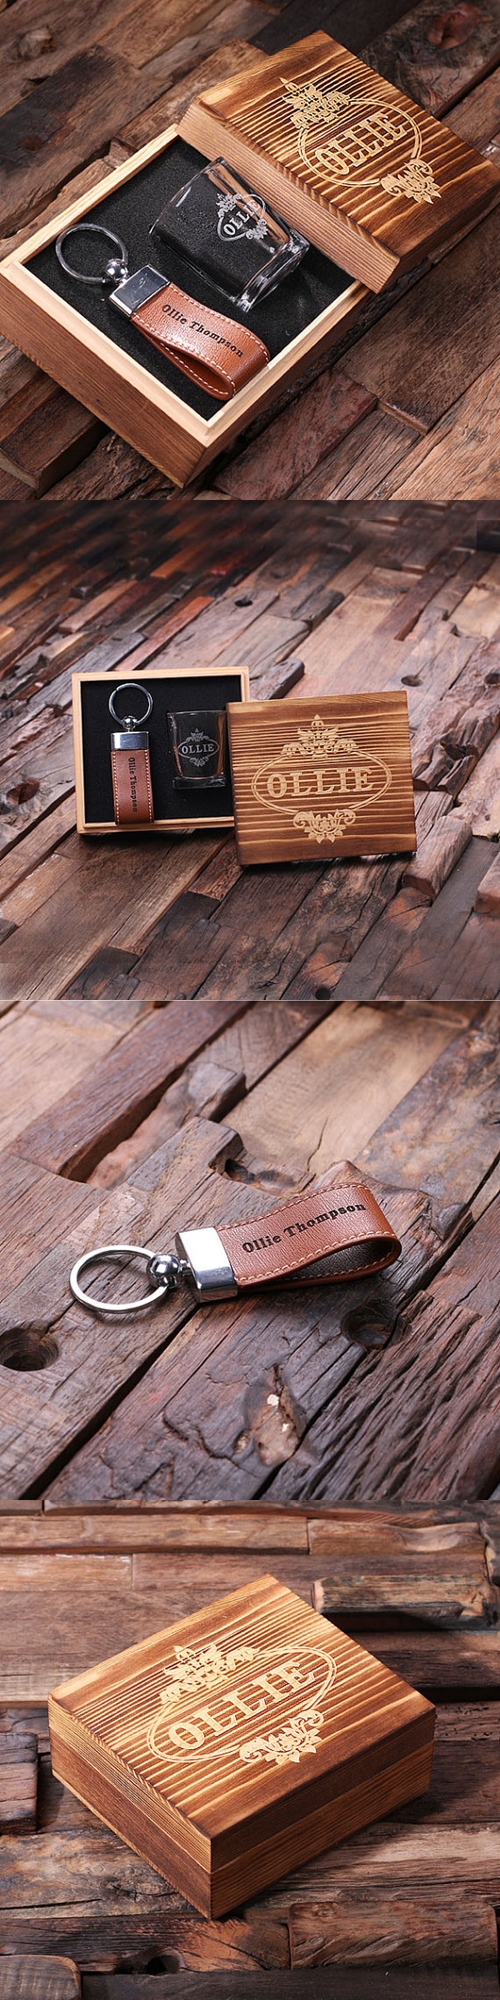 Personalized 3 pc. Gift-Set with Shot Glass & Key Chain in Wood Box